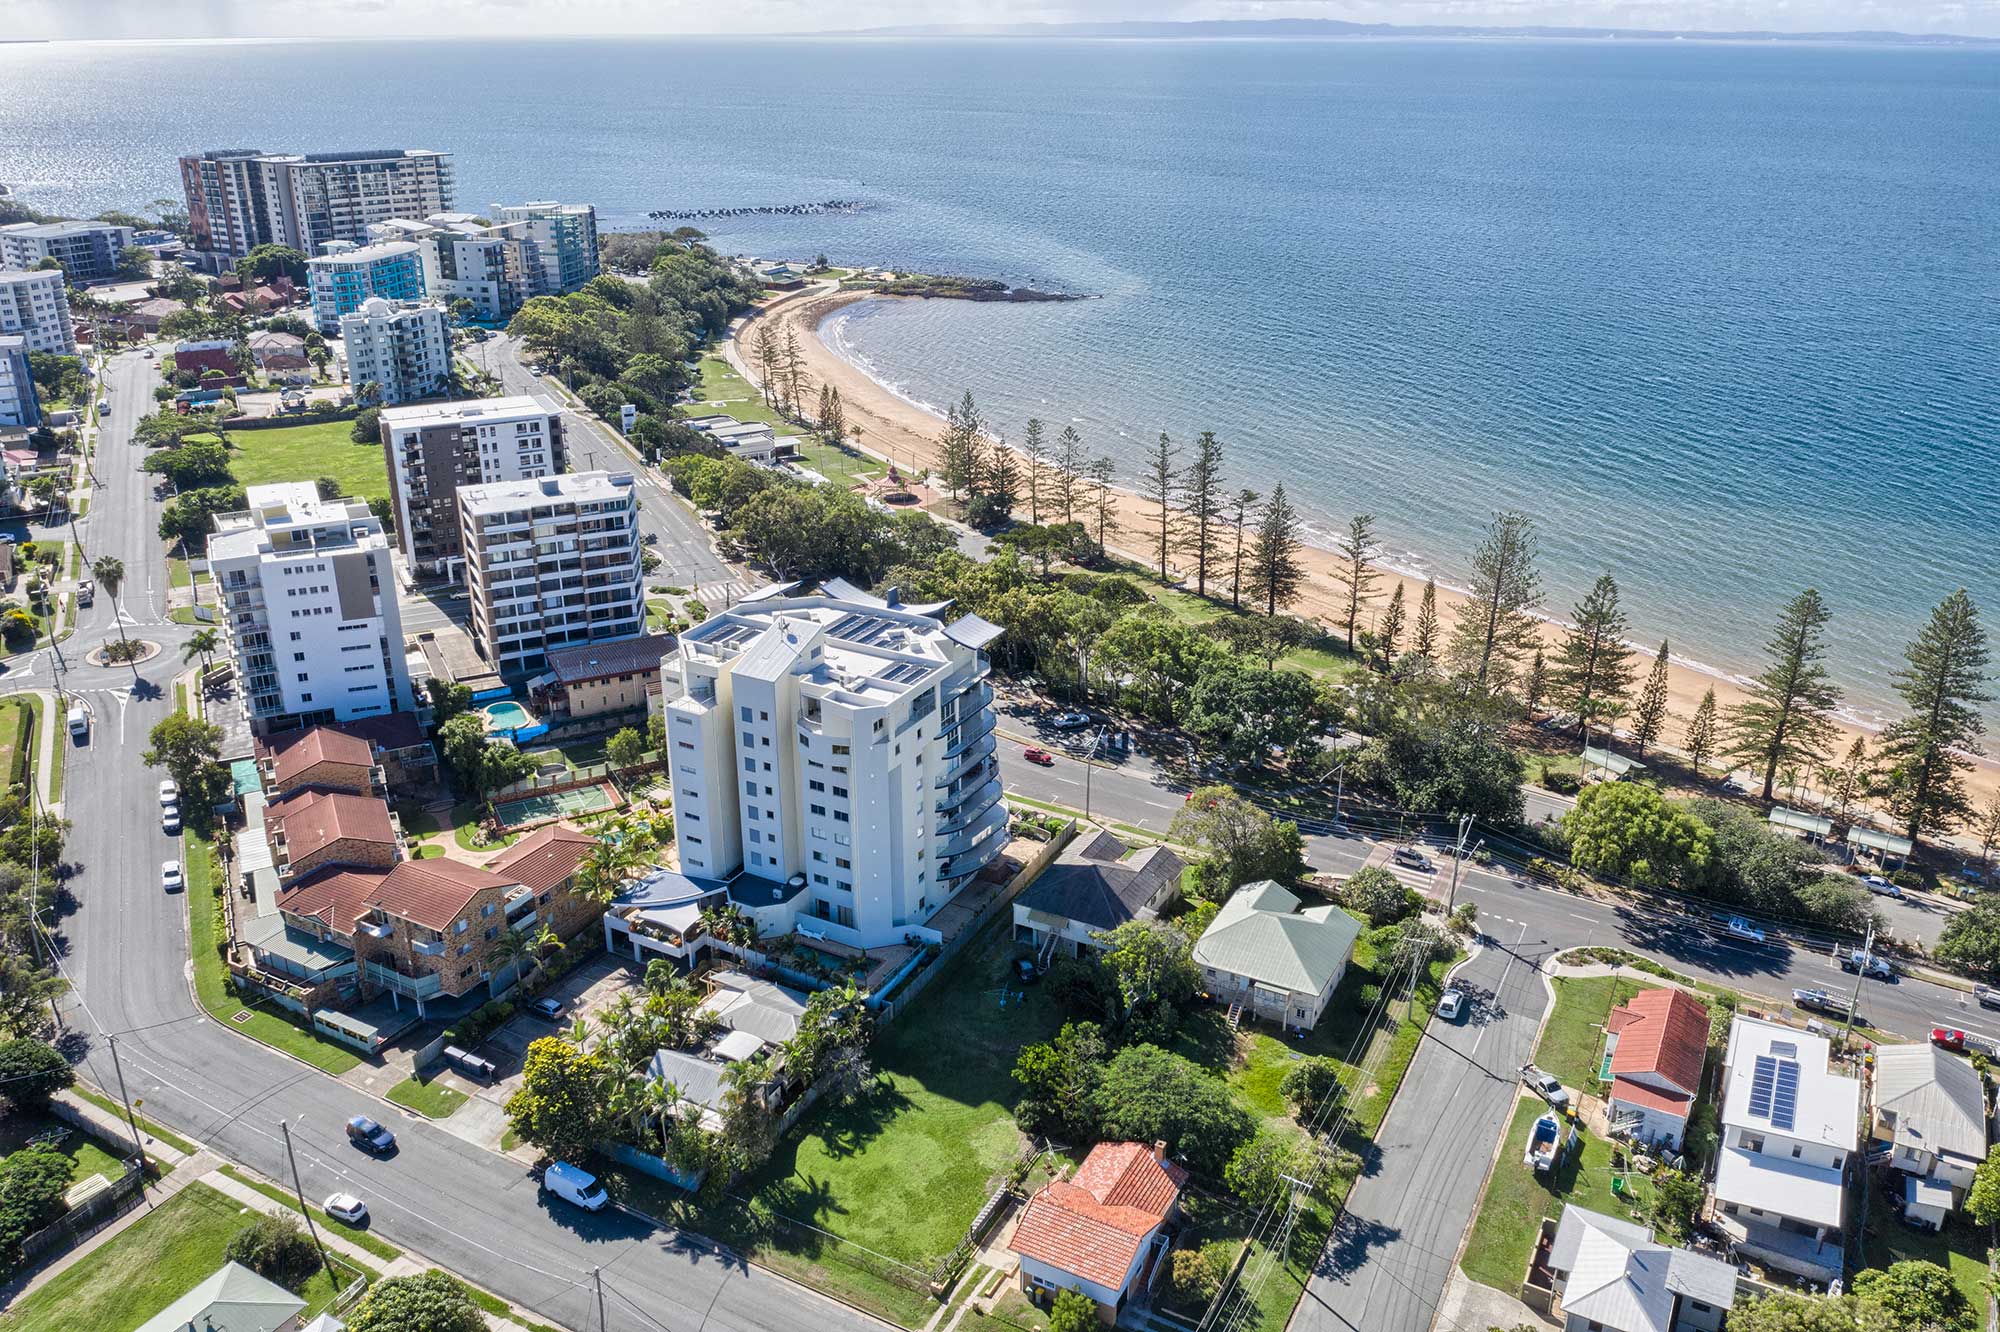 Drone photography at 37 Marine Parade for property development site